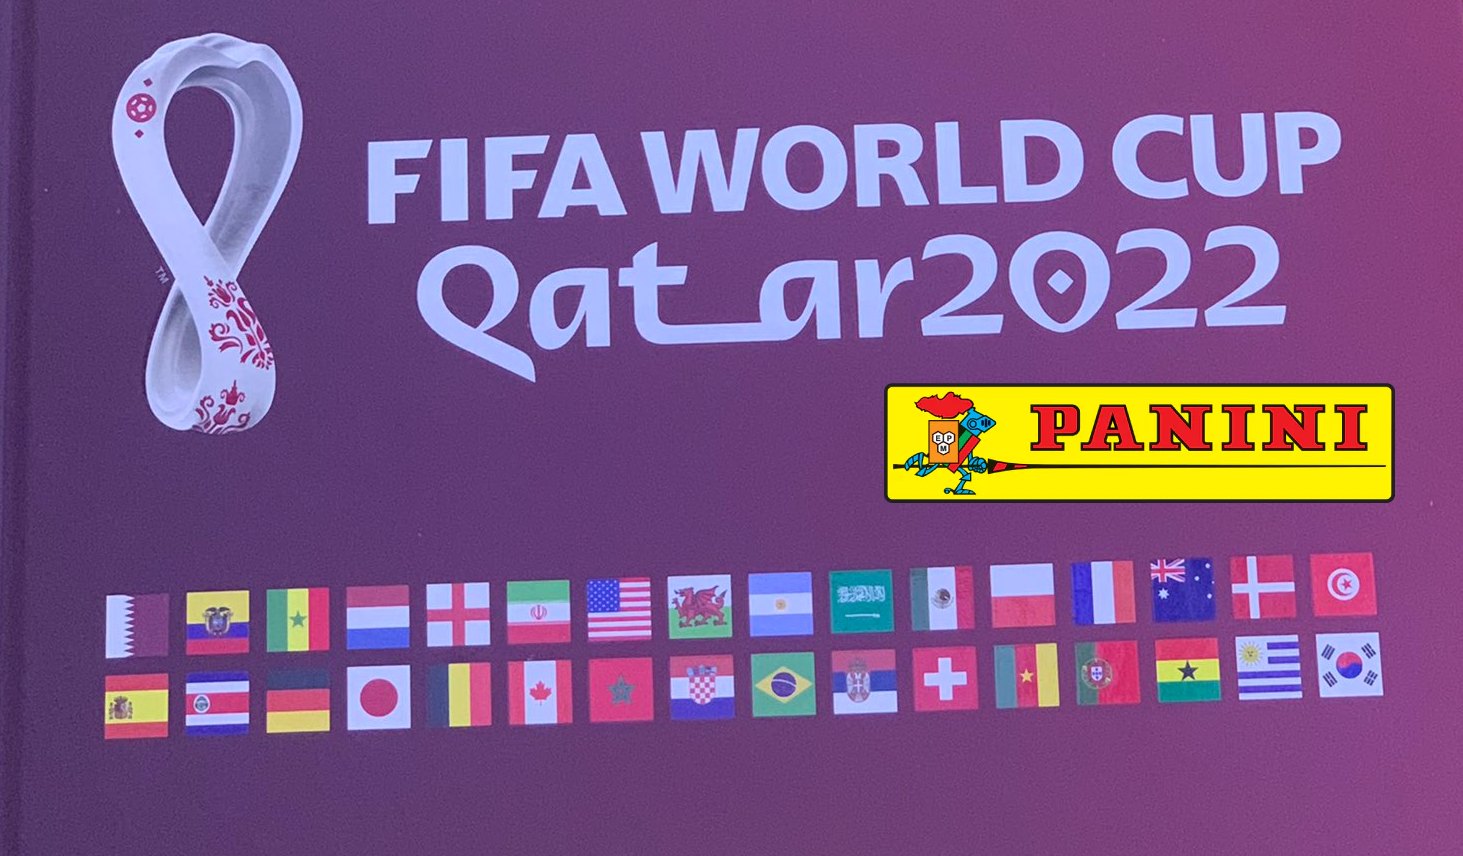 Five curious facts about the Qatar 2022 World Cup Panini album